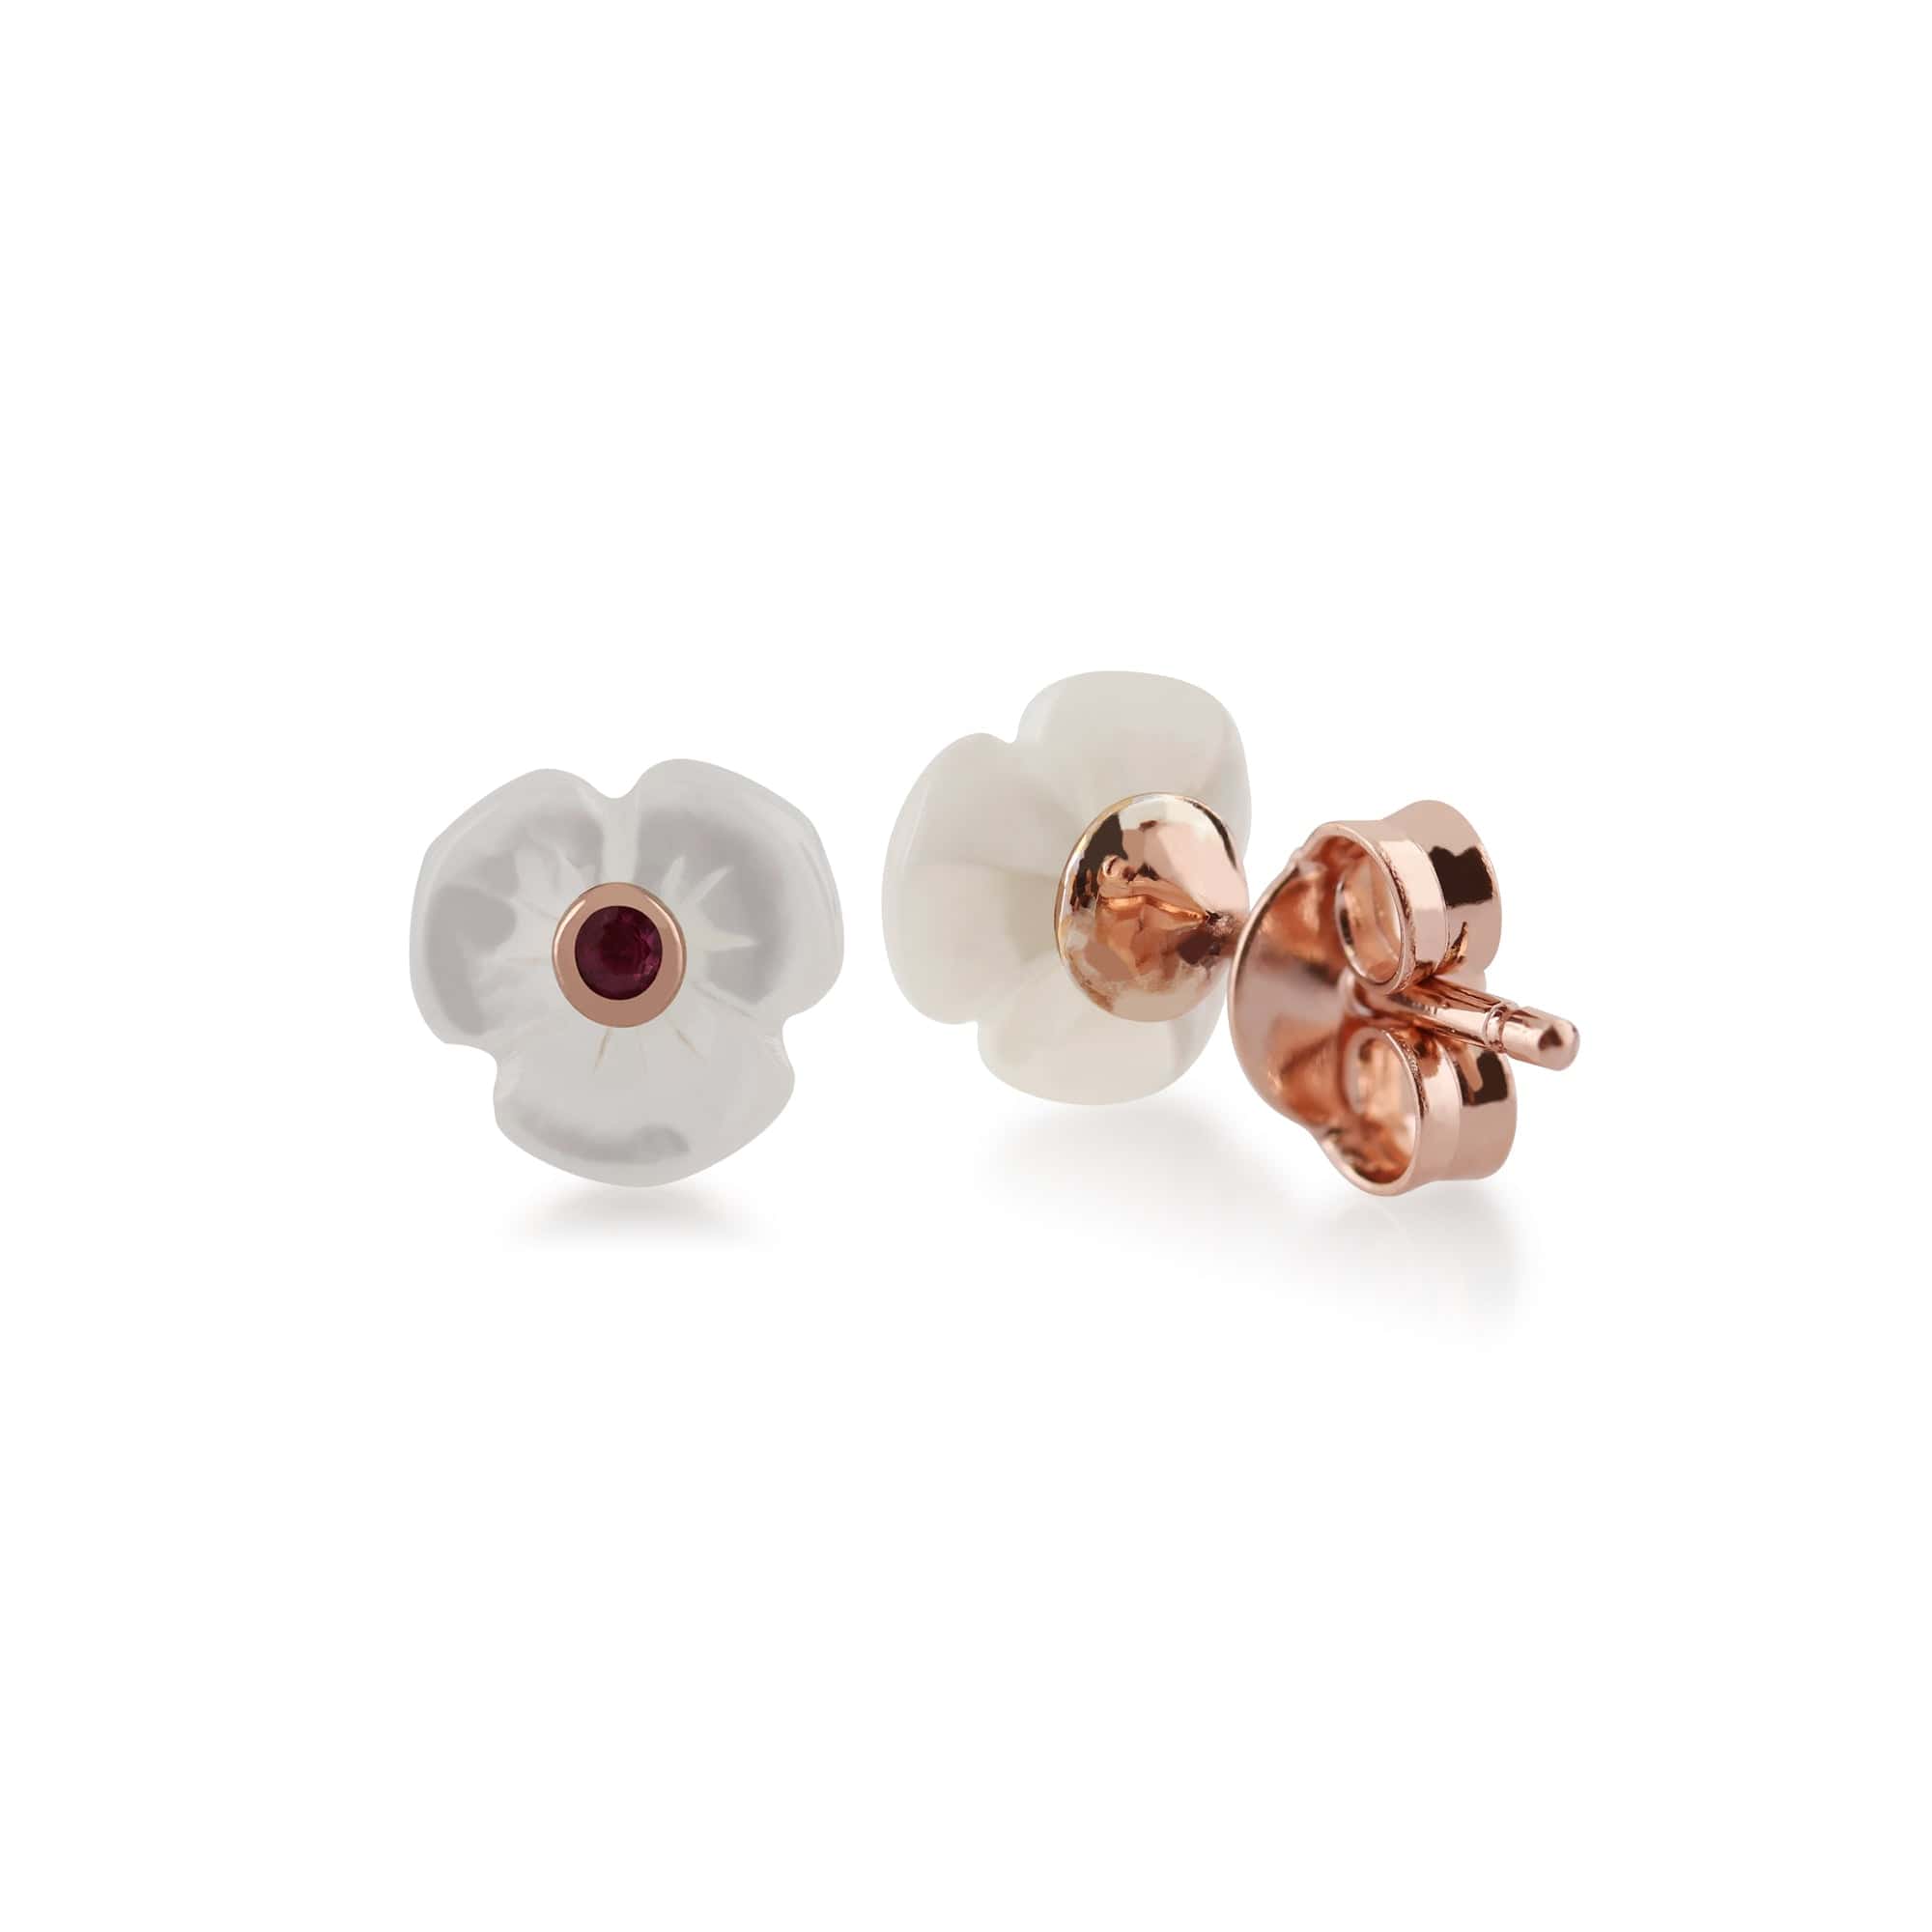 Floral Mother of Pearl & Round Ruby Poppy Stud Earrings in Rose Gold Plated 925 Sterling Silver - Gemondo